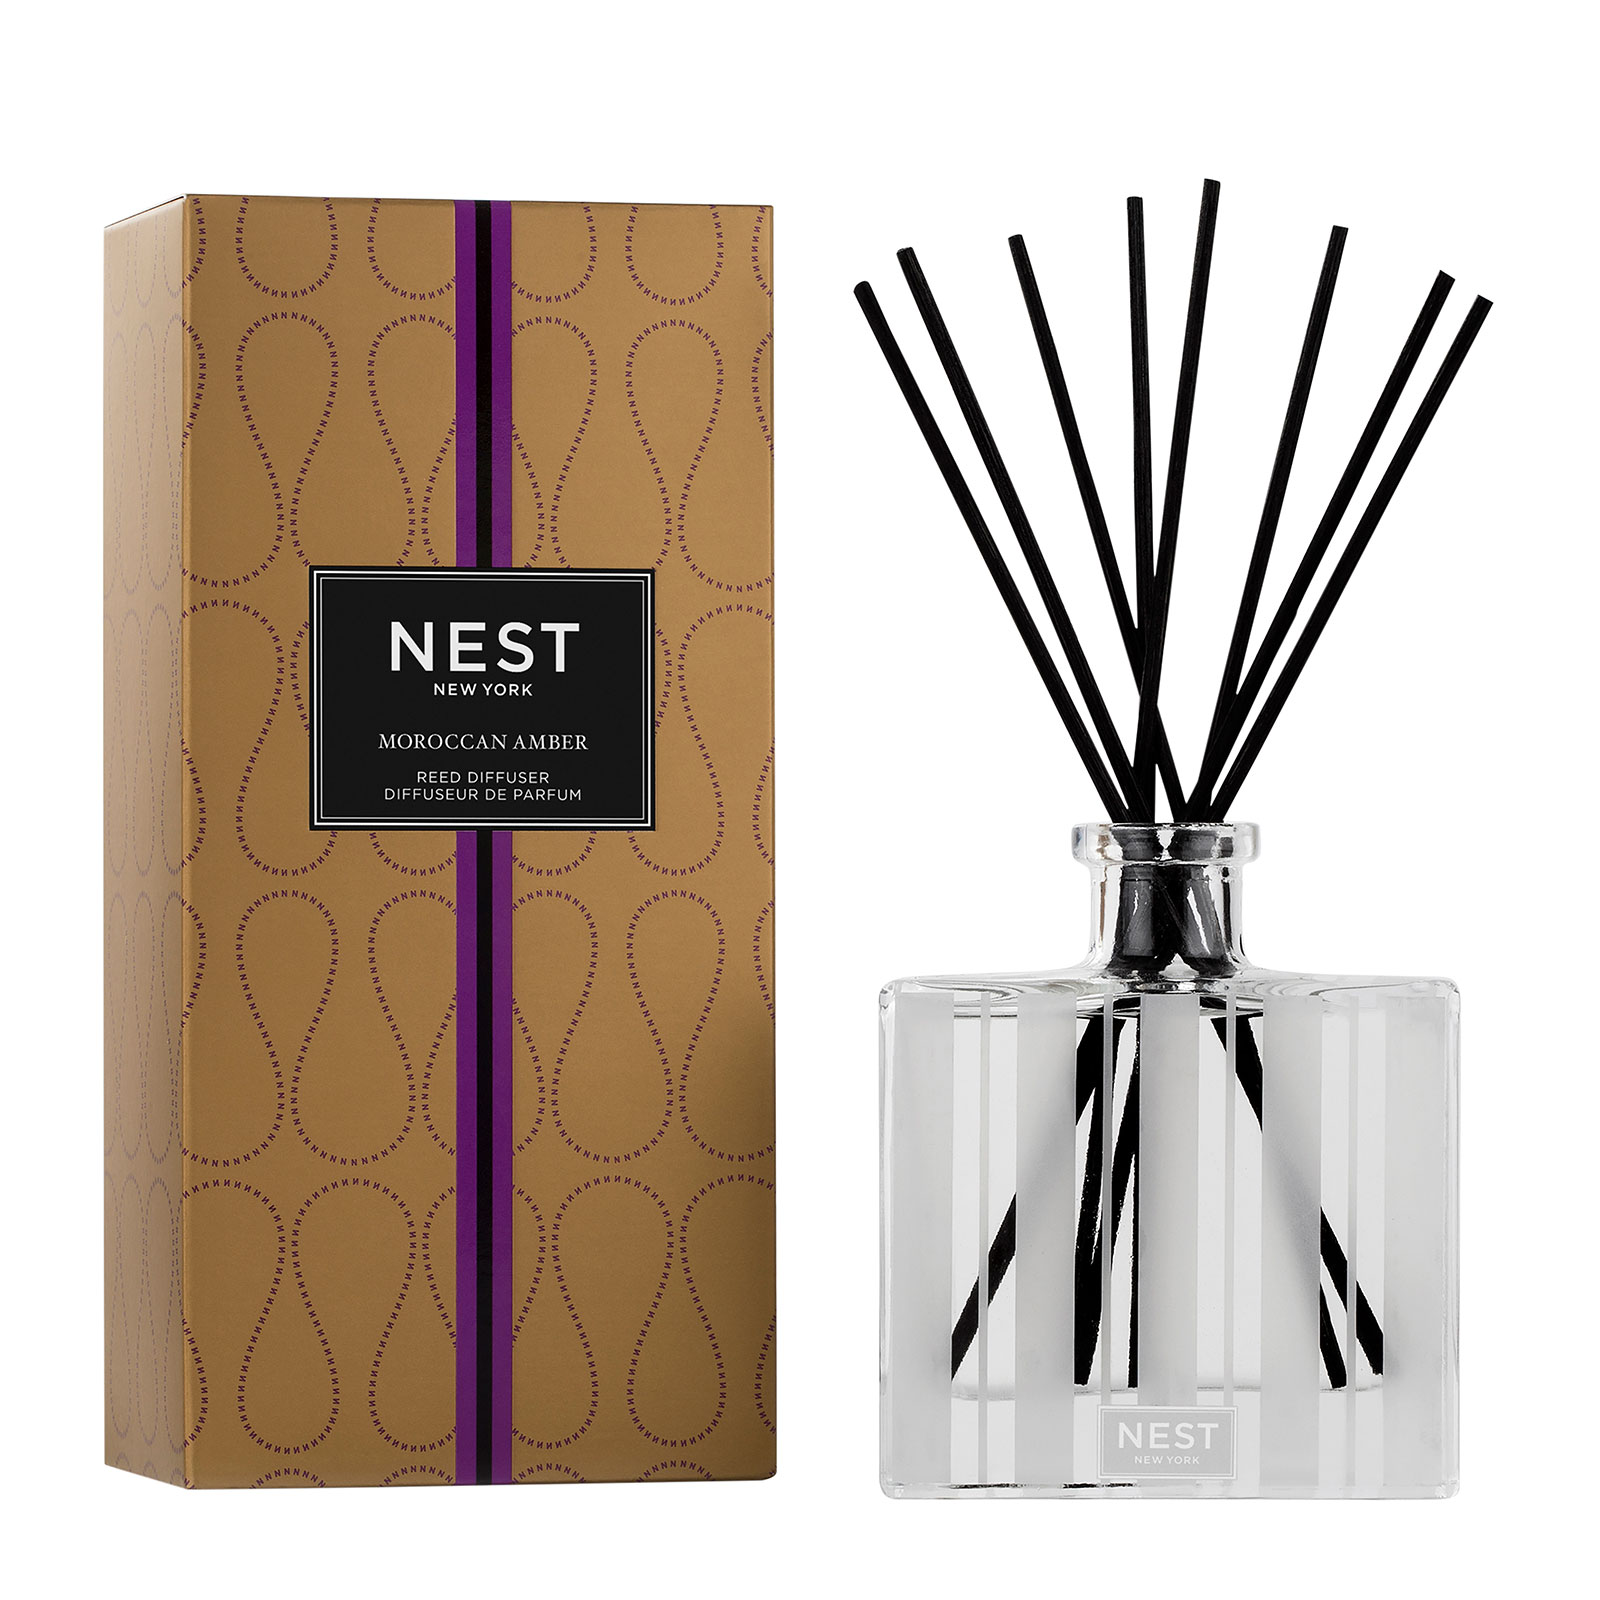 Nest New York Moroccan Amber Reed Diffuser 175Ml